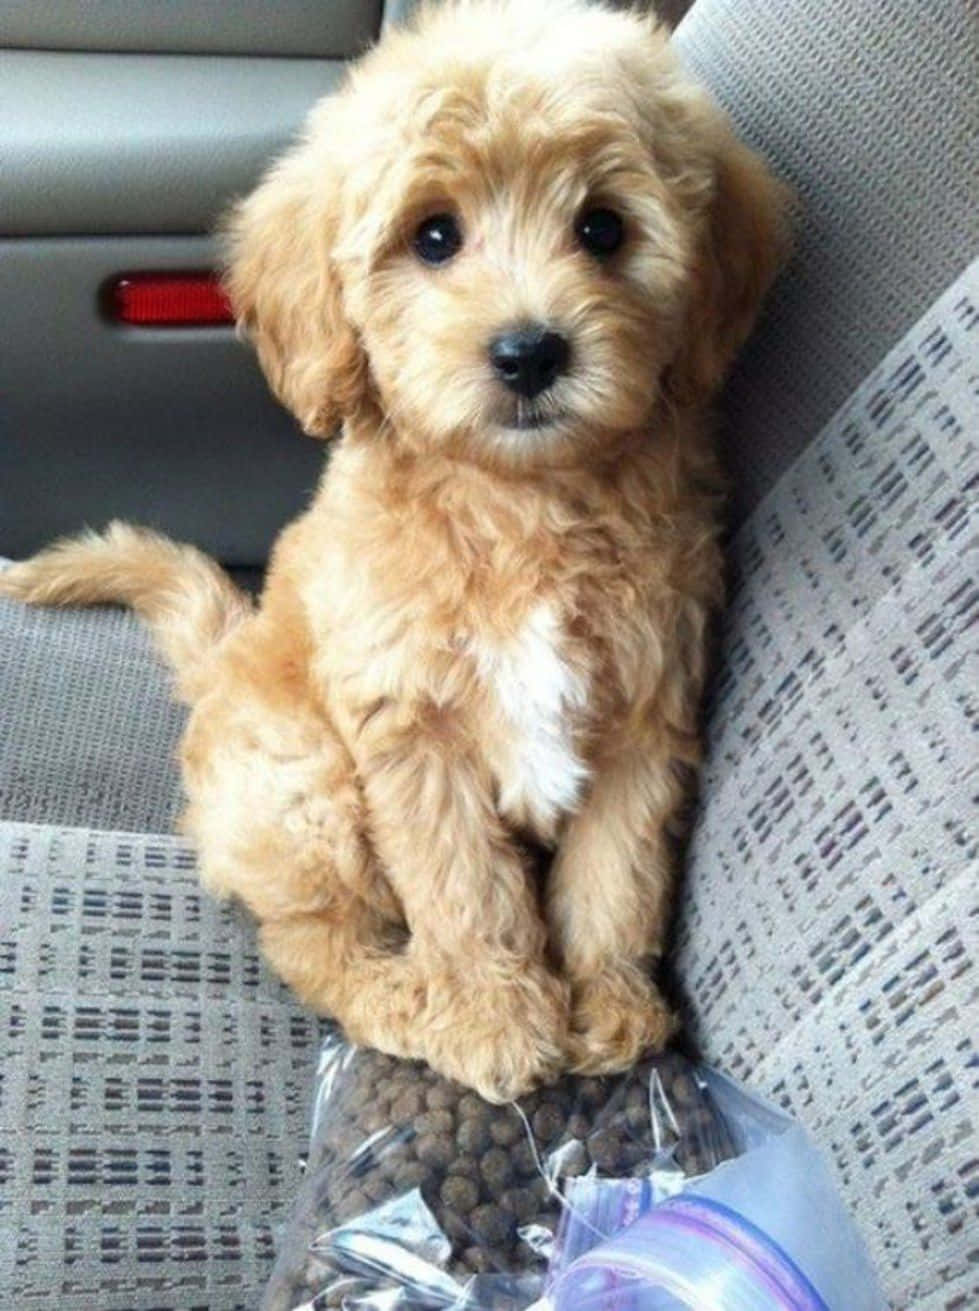 "This adorable puppy is ready for any adventure!"